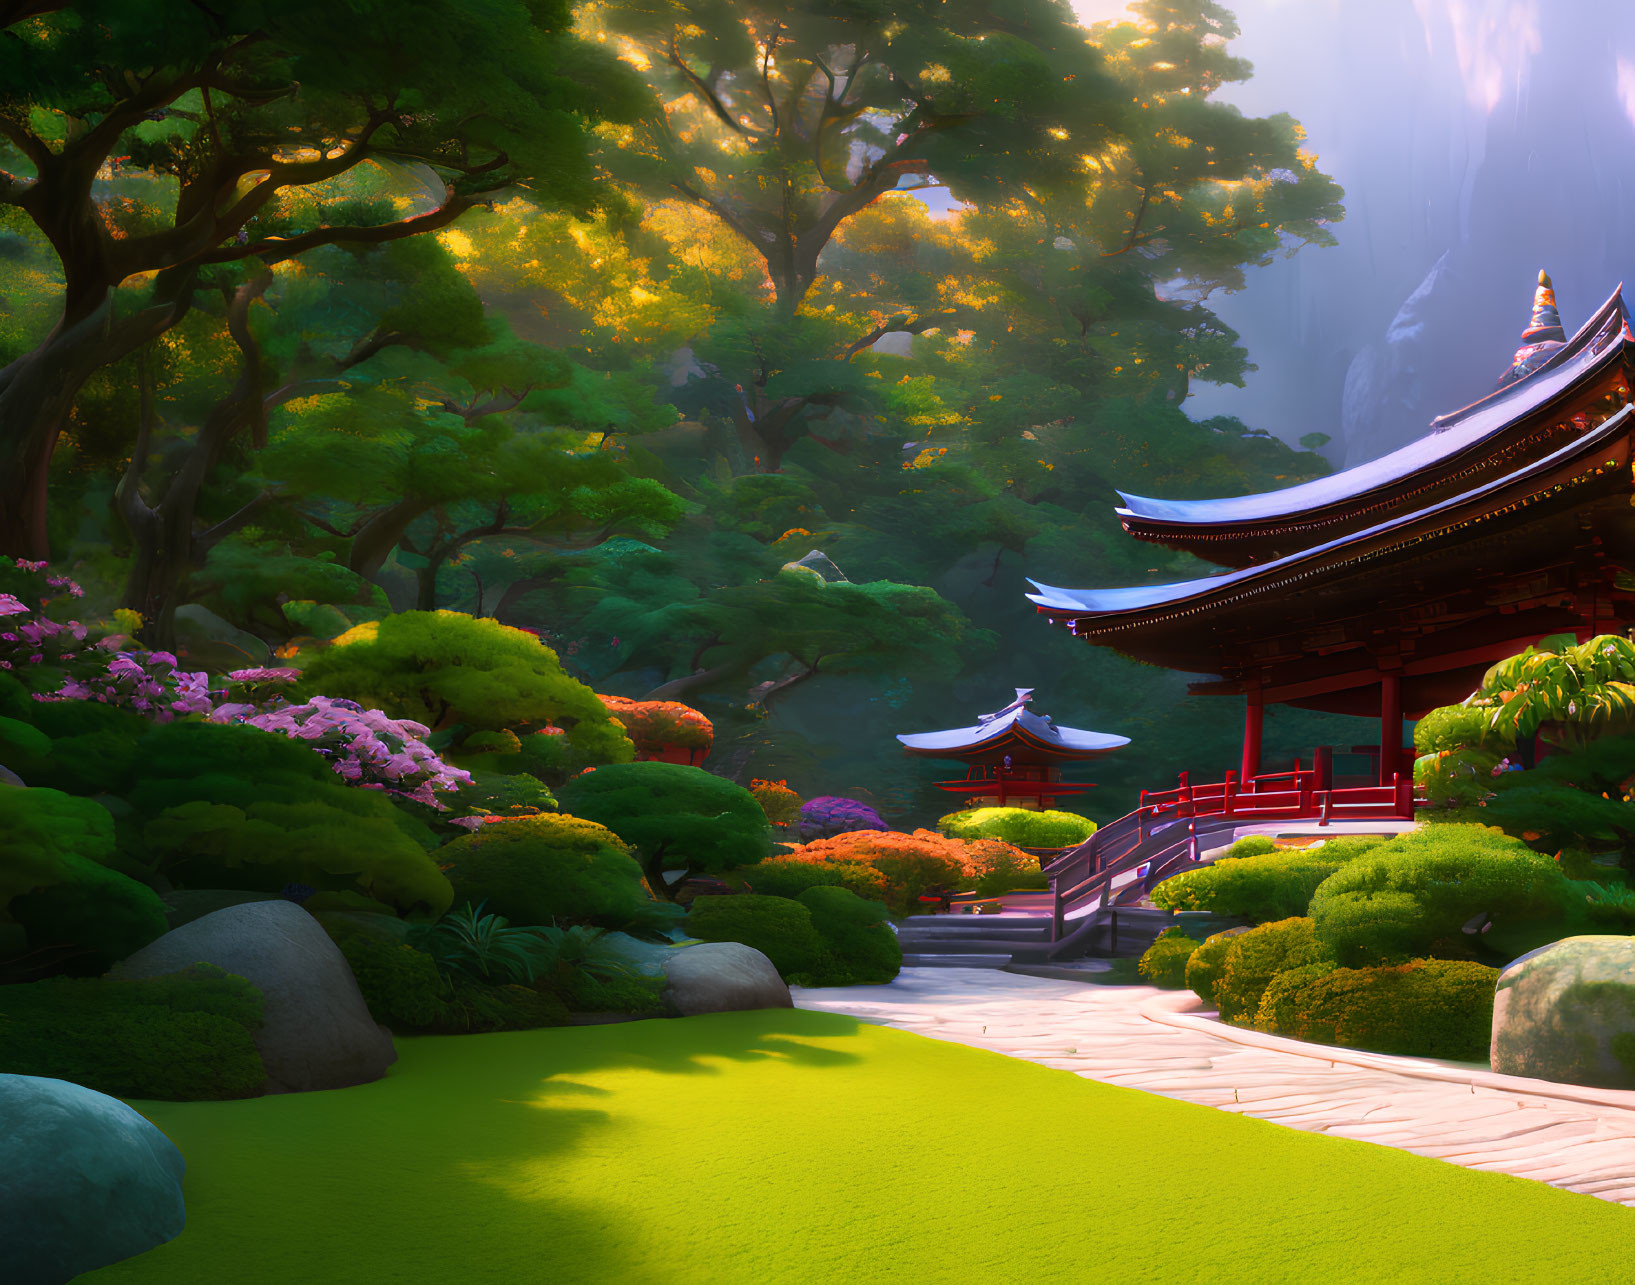 Tranquil Japanese garden with red pagoda, stone path, and lush greenery